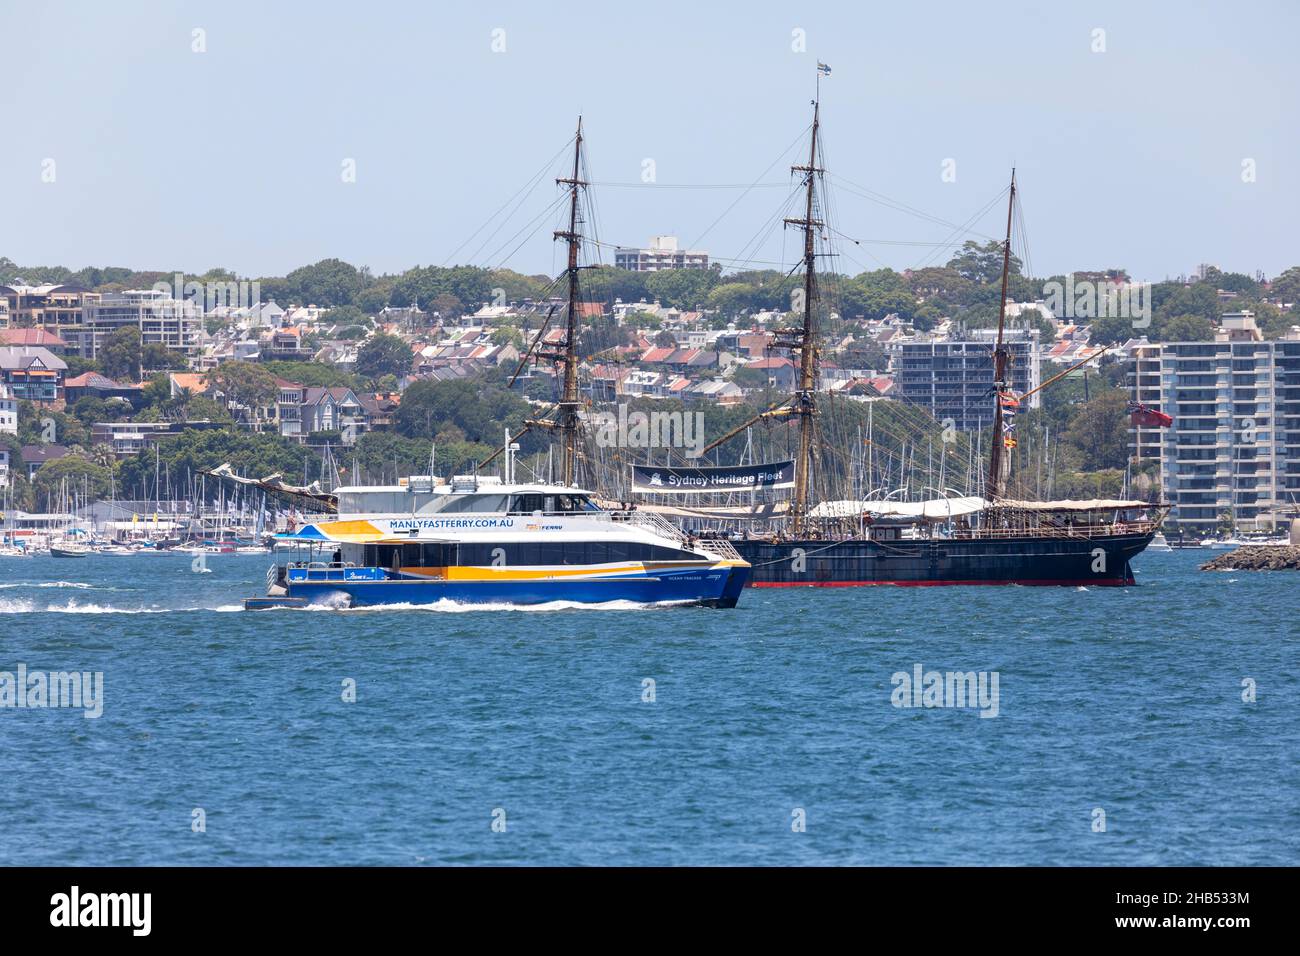 Barque 1874 tall ship the James Craig passes a Sydney ferry, the Manly fast ferry, on Sydney Harbour,NSW,Australia Stock Photo